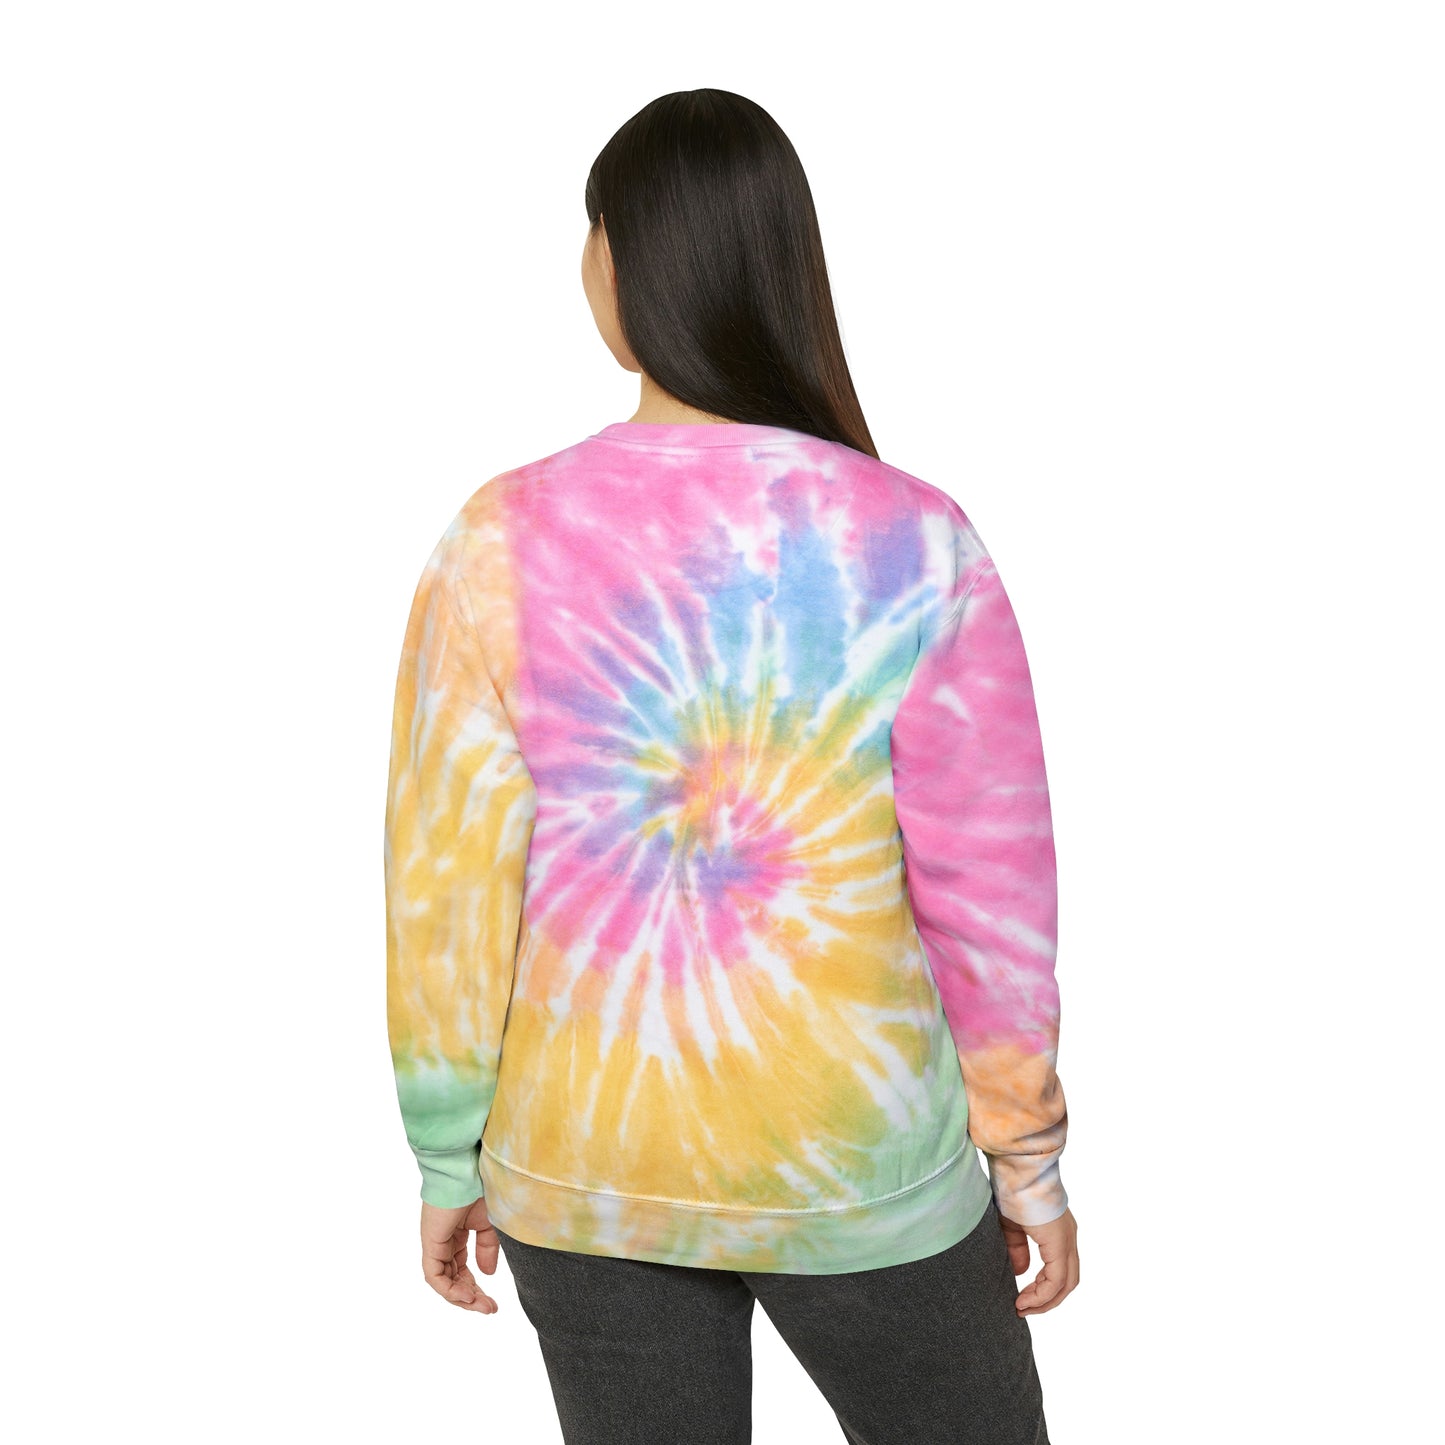 Add some color to your mom's wardrobe with our Best Mom Ever tie-dye sweatshirt!